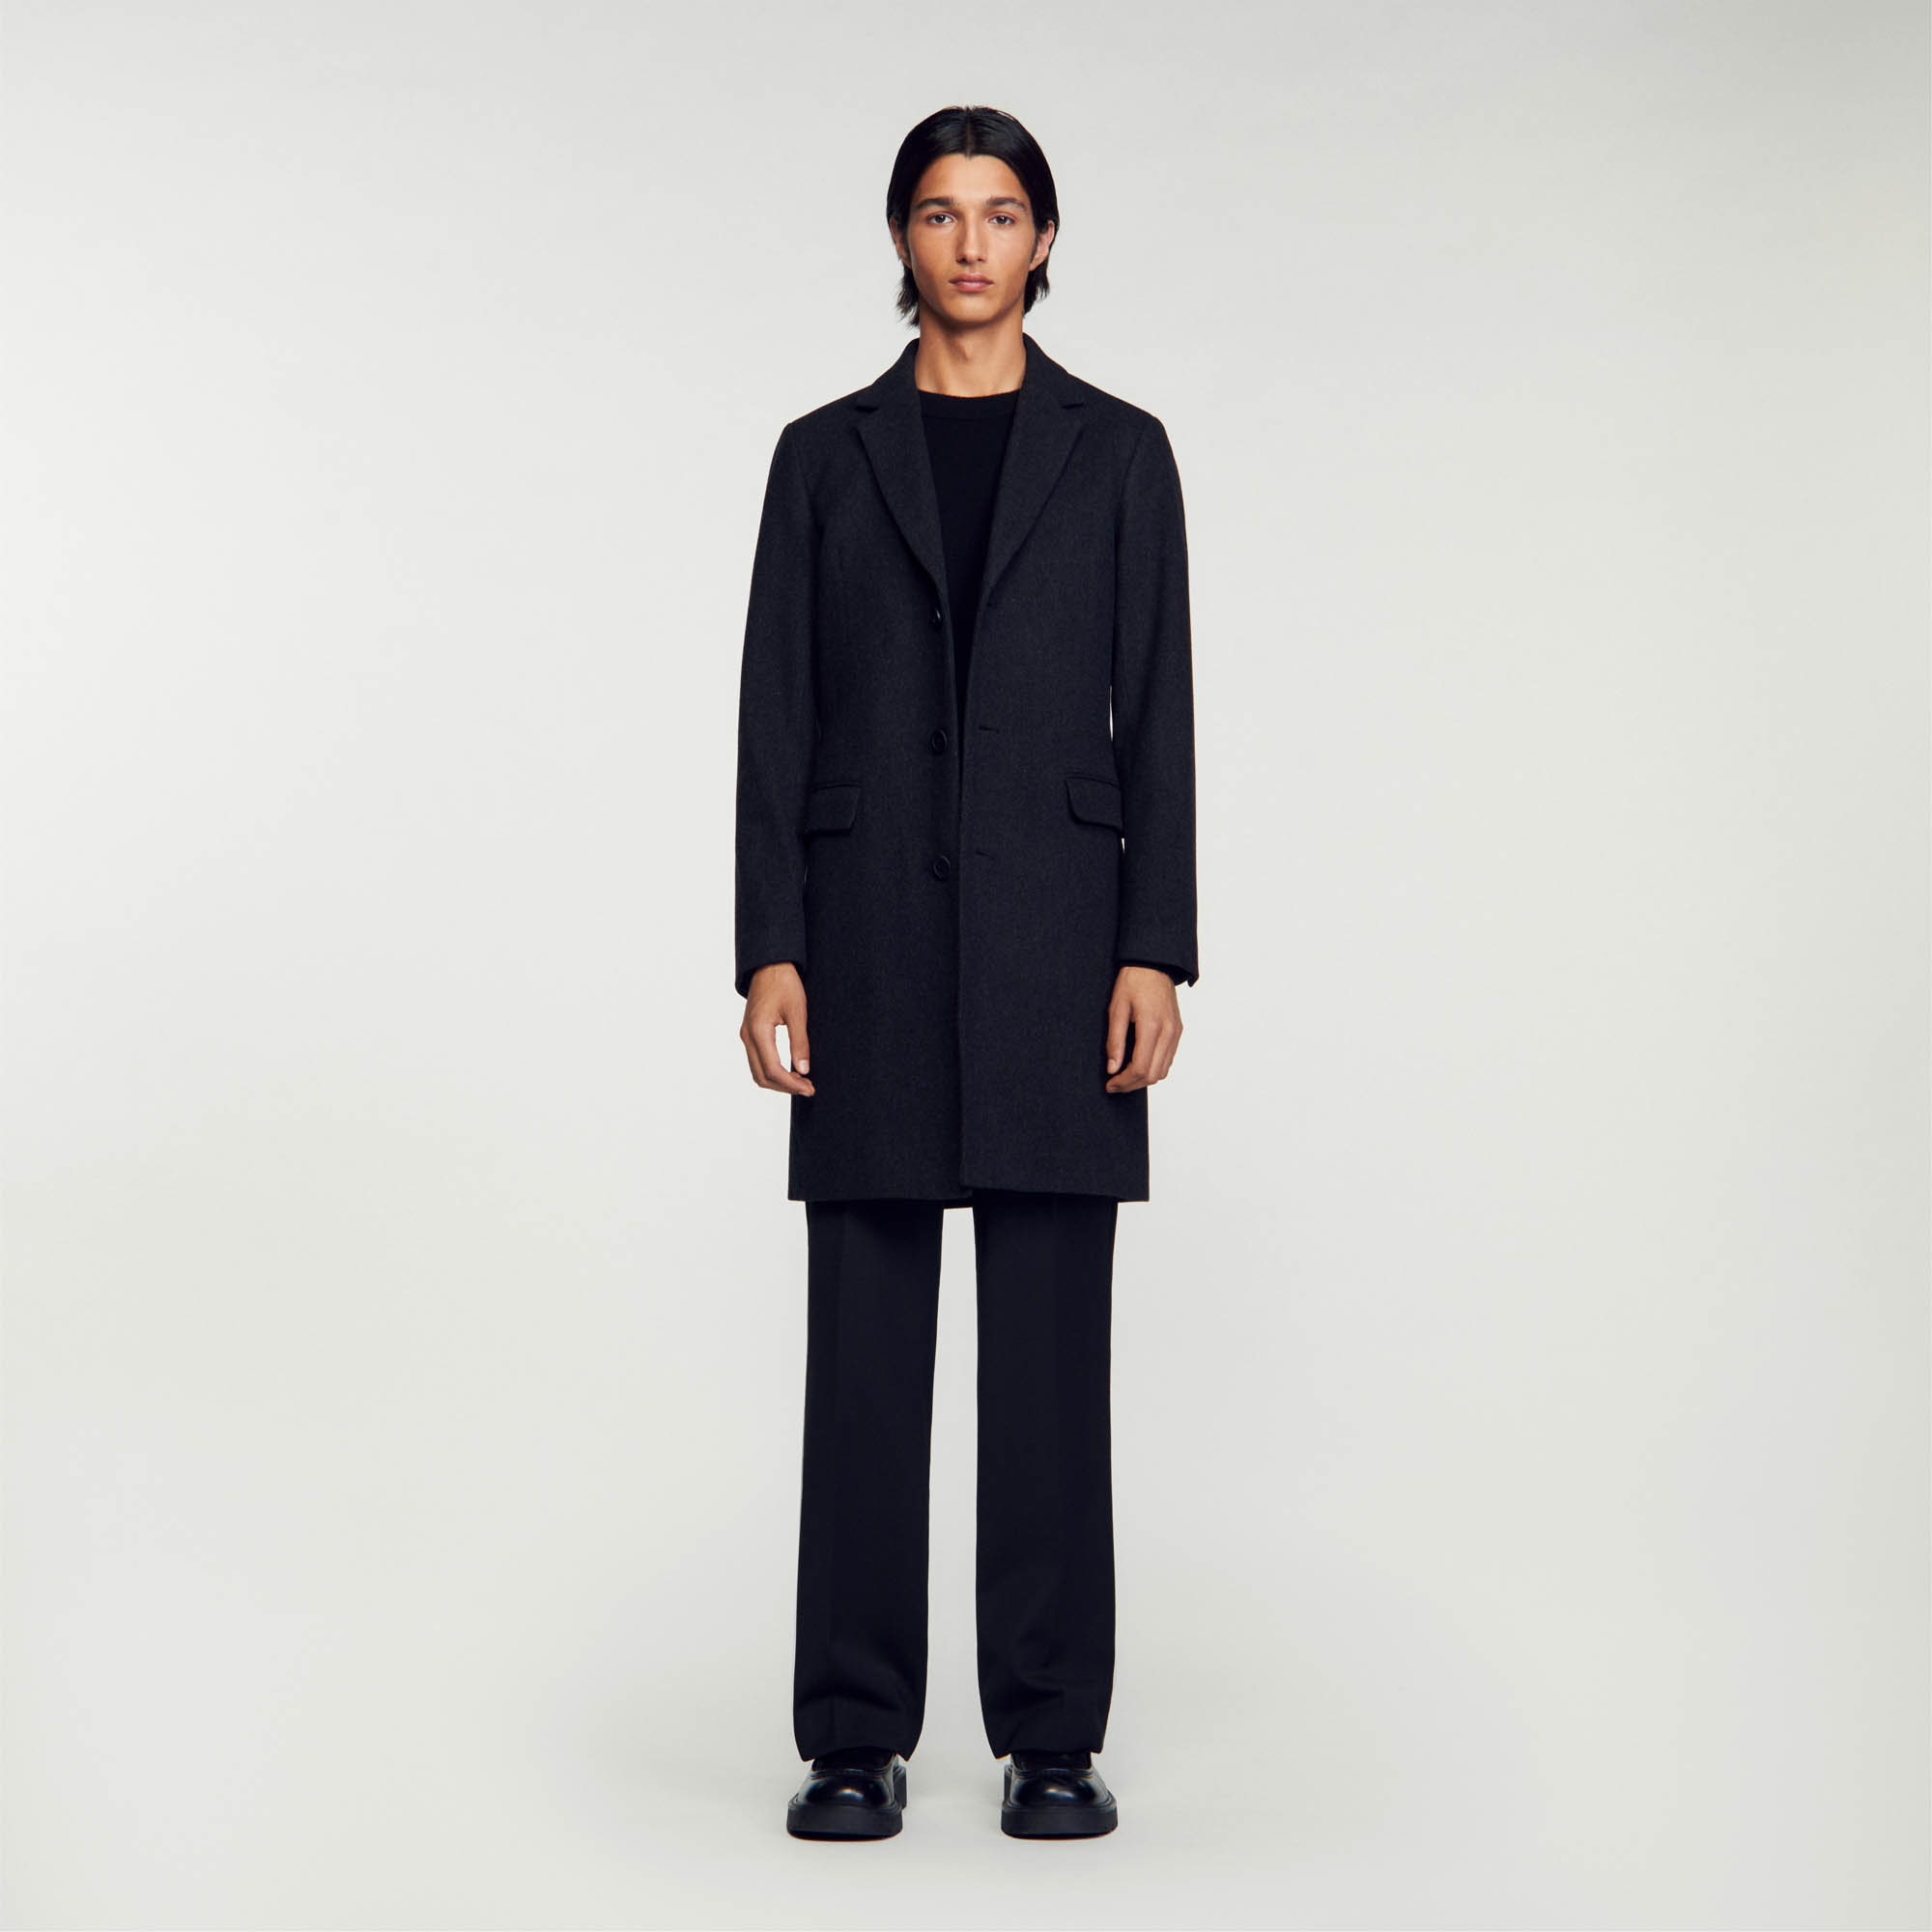 Sandro wool Broadcloth wool coat featuring a lapel collar, long sleeves, three-button fastening, side pockets and a vent at the back